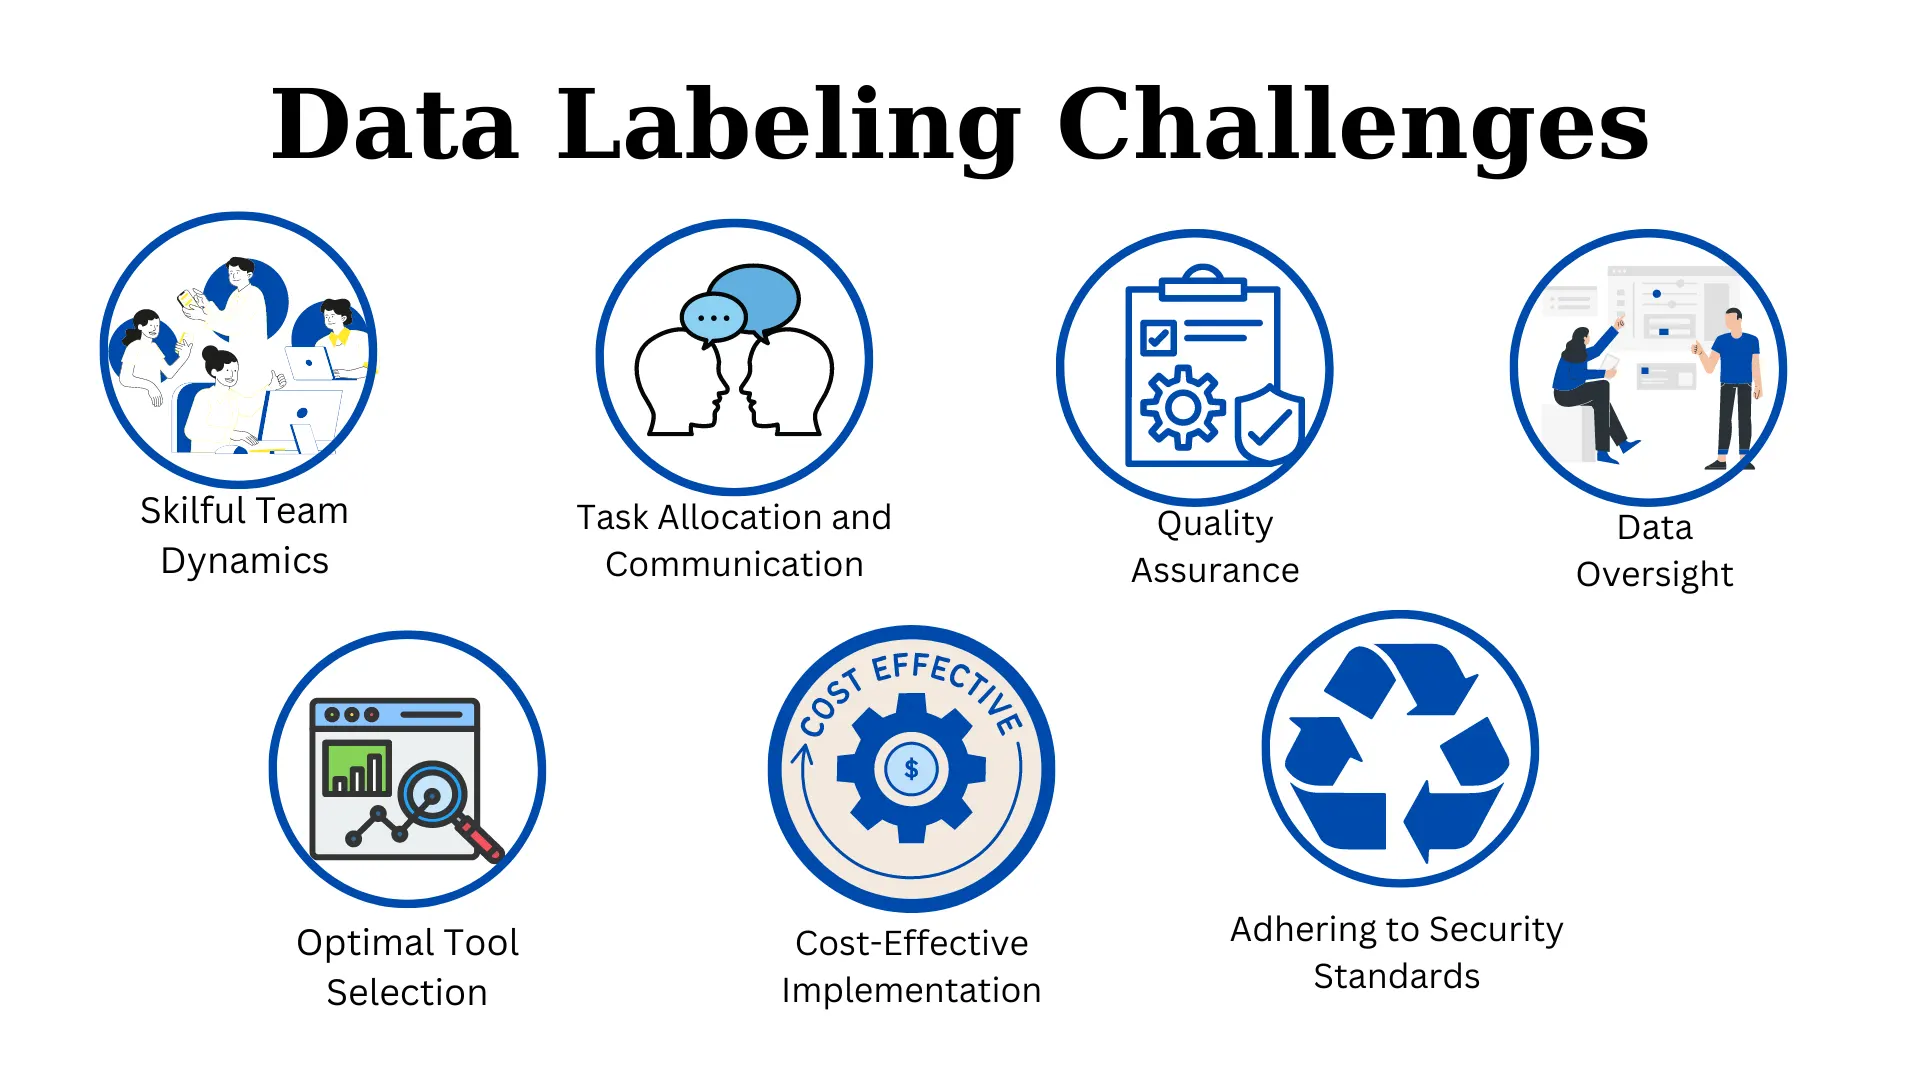 Data Labeling Challenges